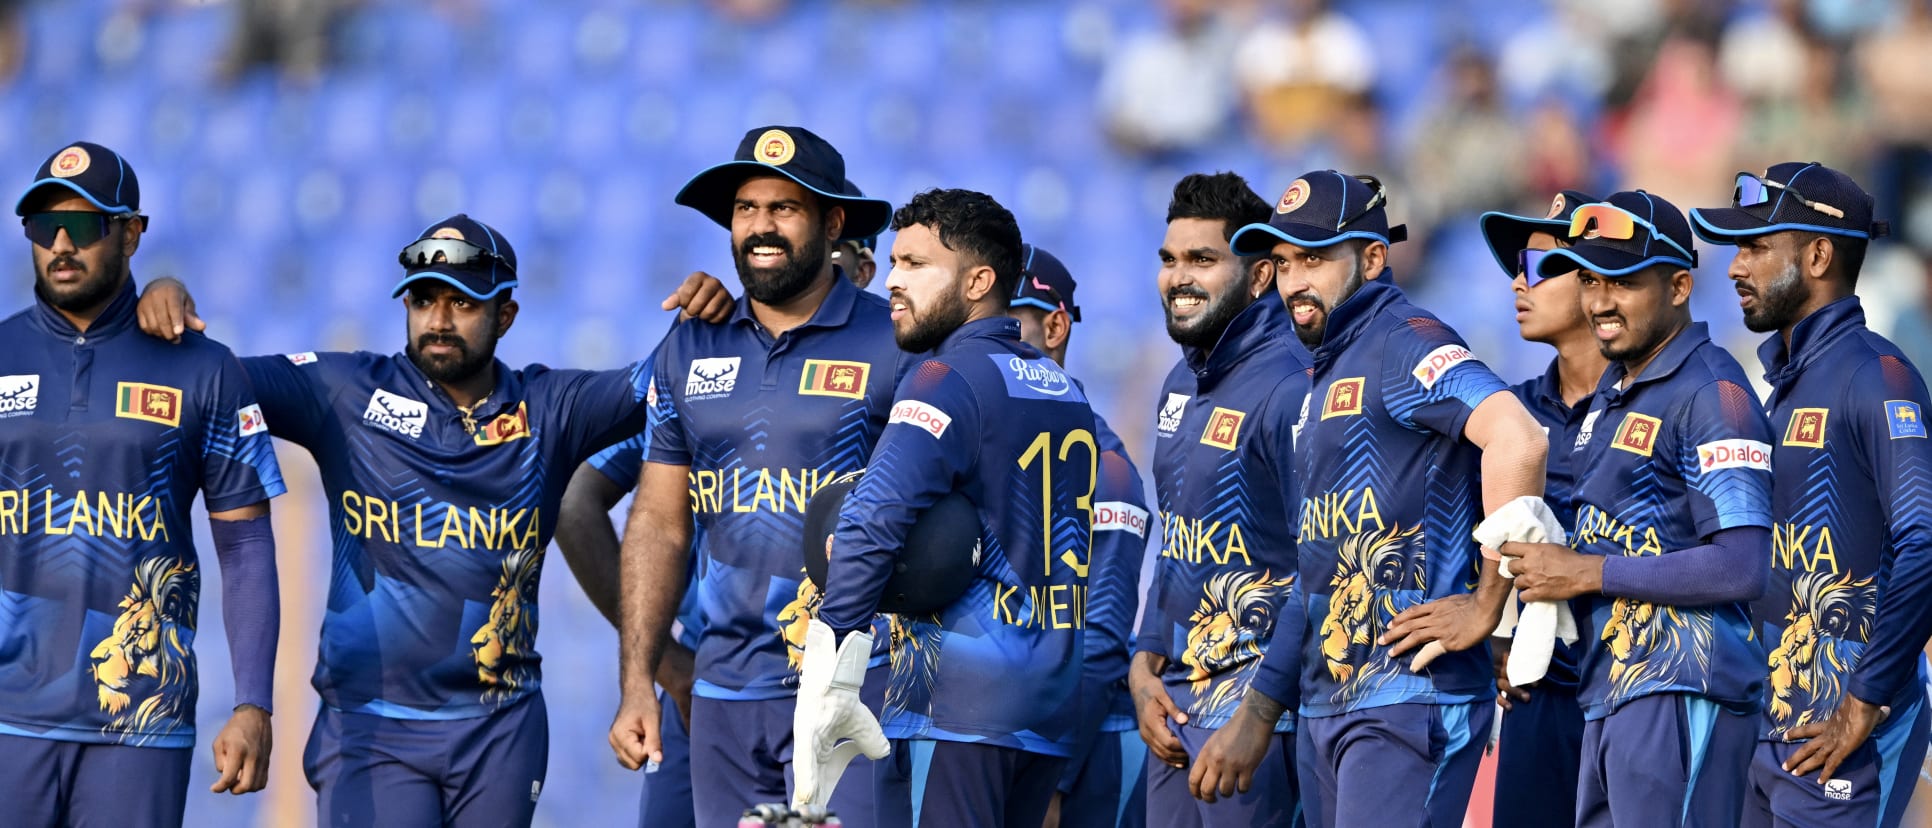 Sri Lanka name strong squad for T20I World Cup